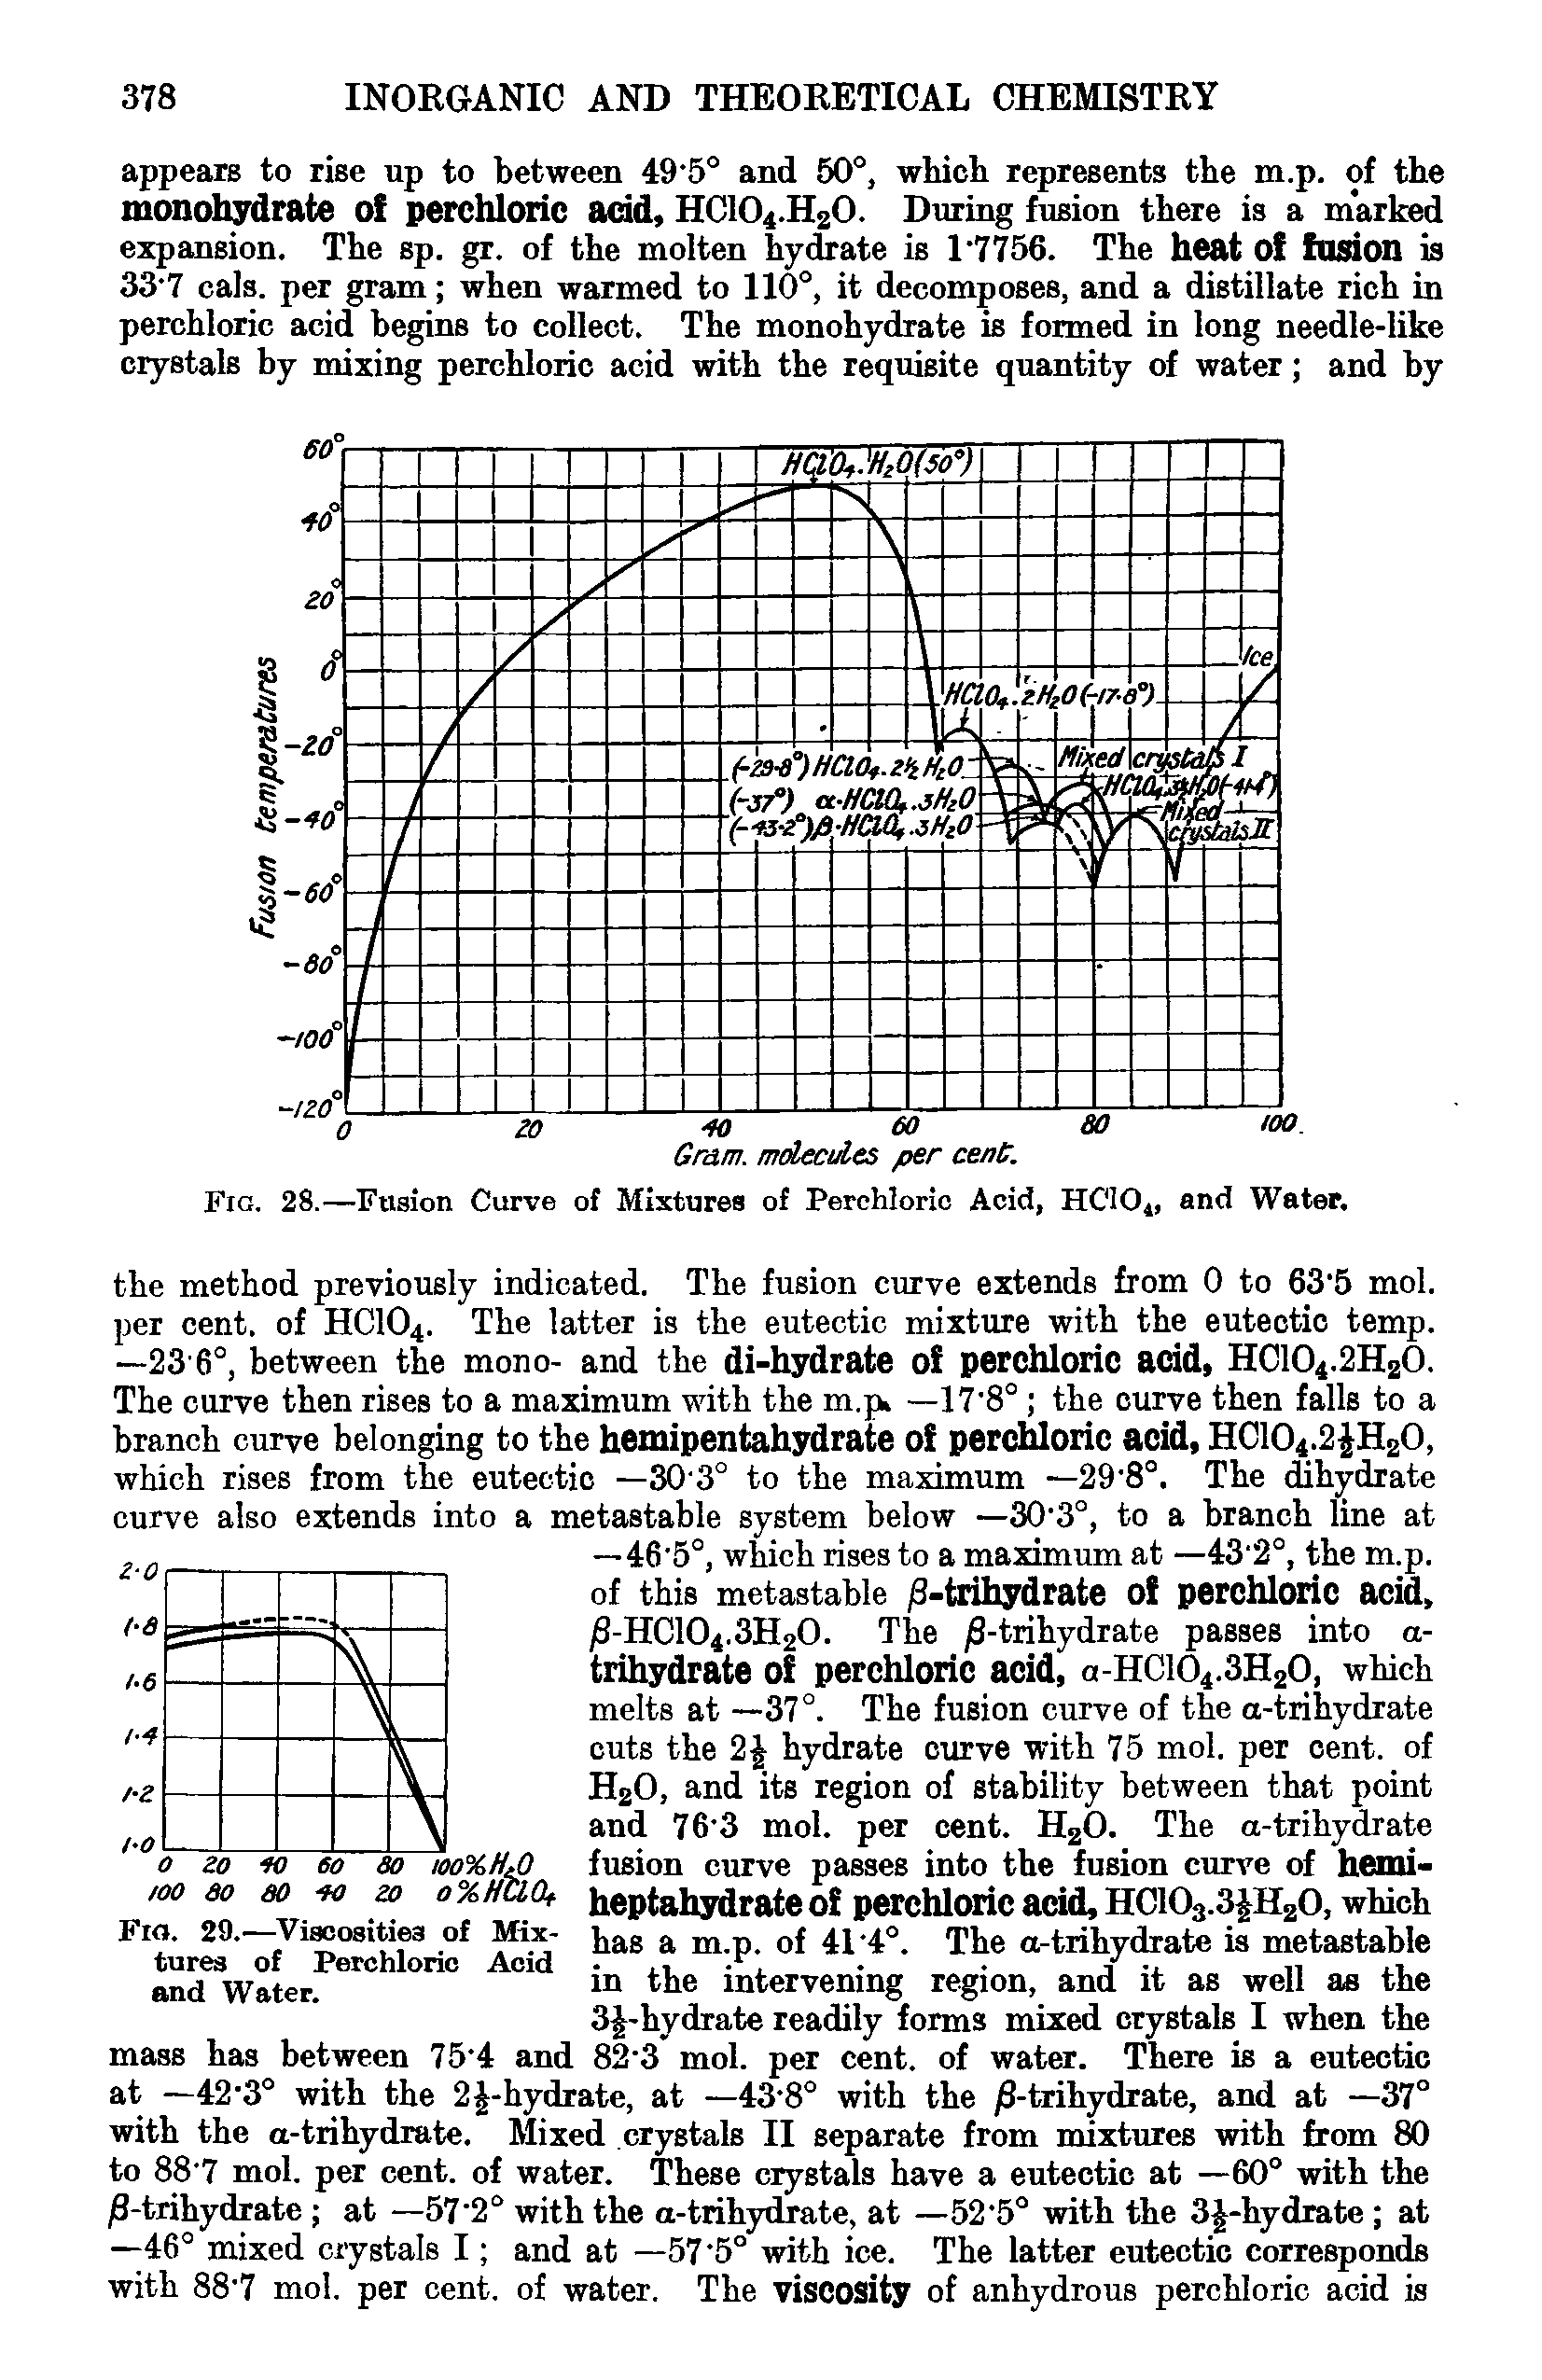 Fig. 28.—Fusion Curve of Mixtures of Perchloric Acid, HC104, and Water.